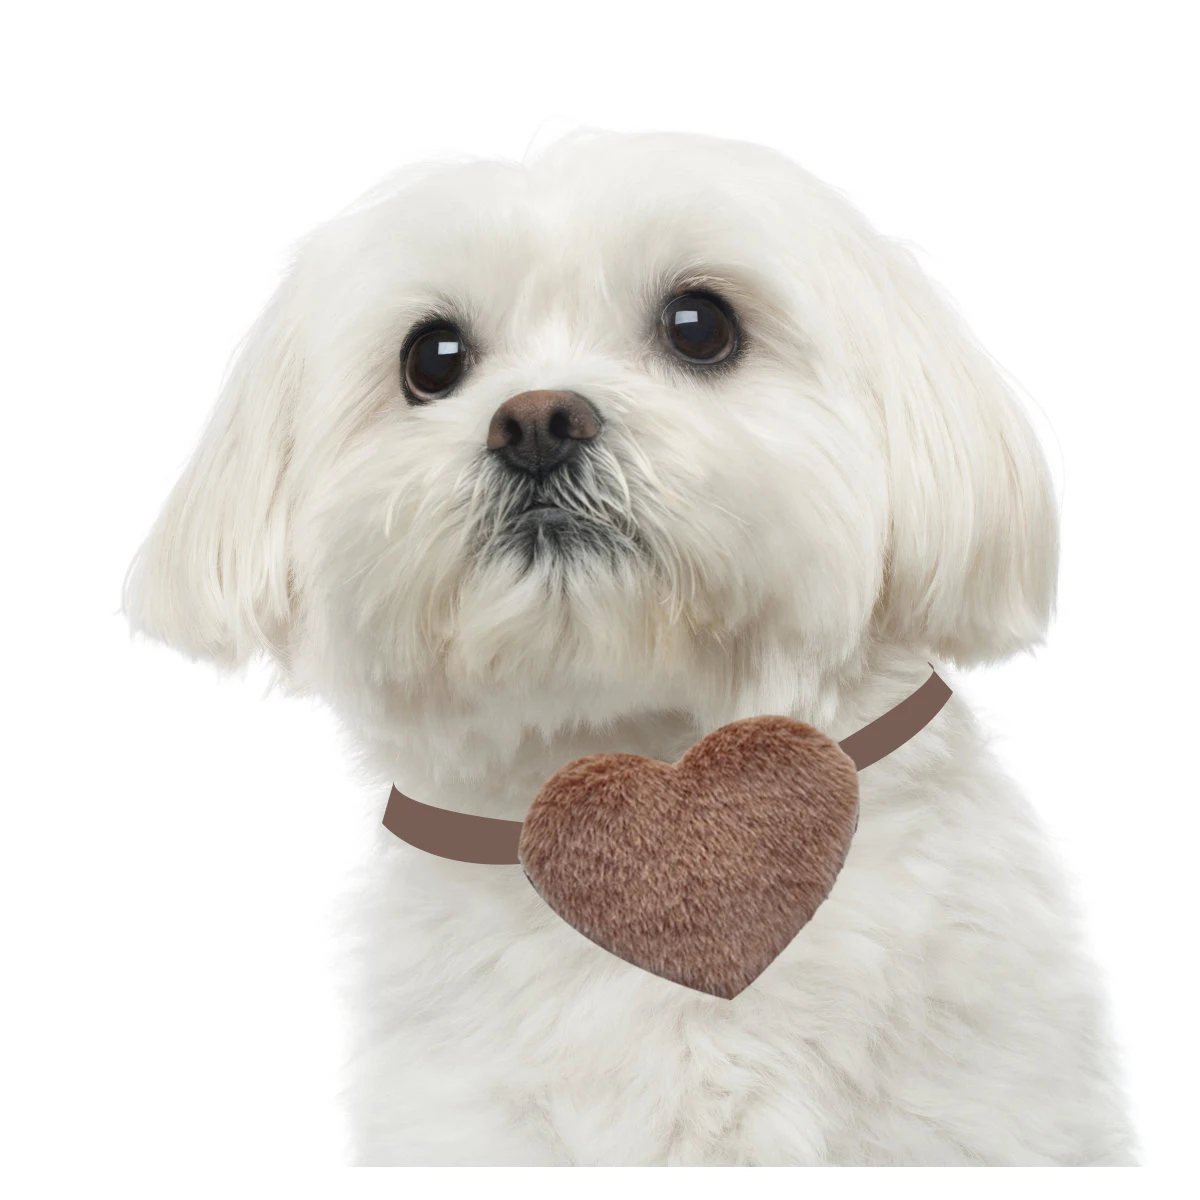 

Collars Dog Valentine's Shape Bow Heart Product Dog Grooming Bowtie 50/100pcs Ties Day Dog Pet Bowties Adjustable Neckties Small